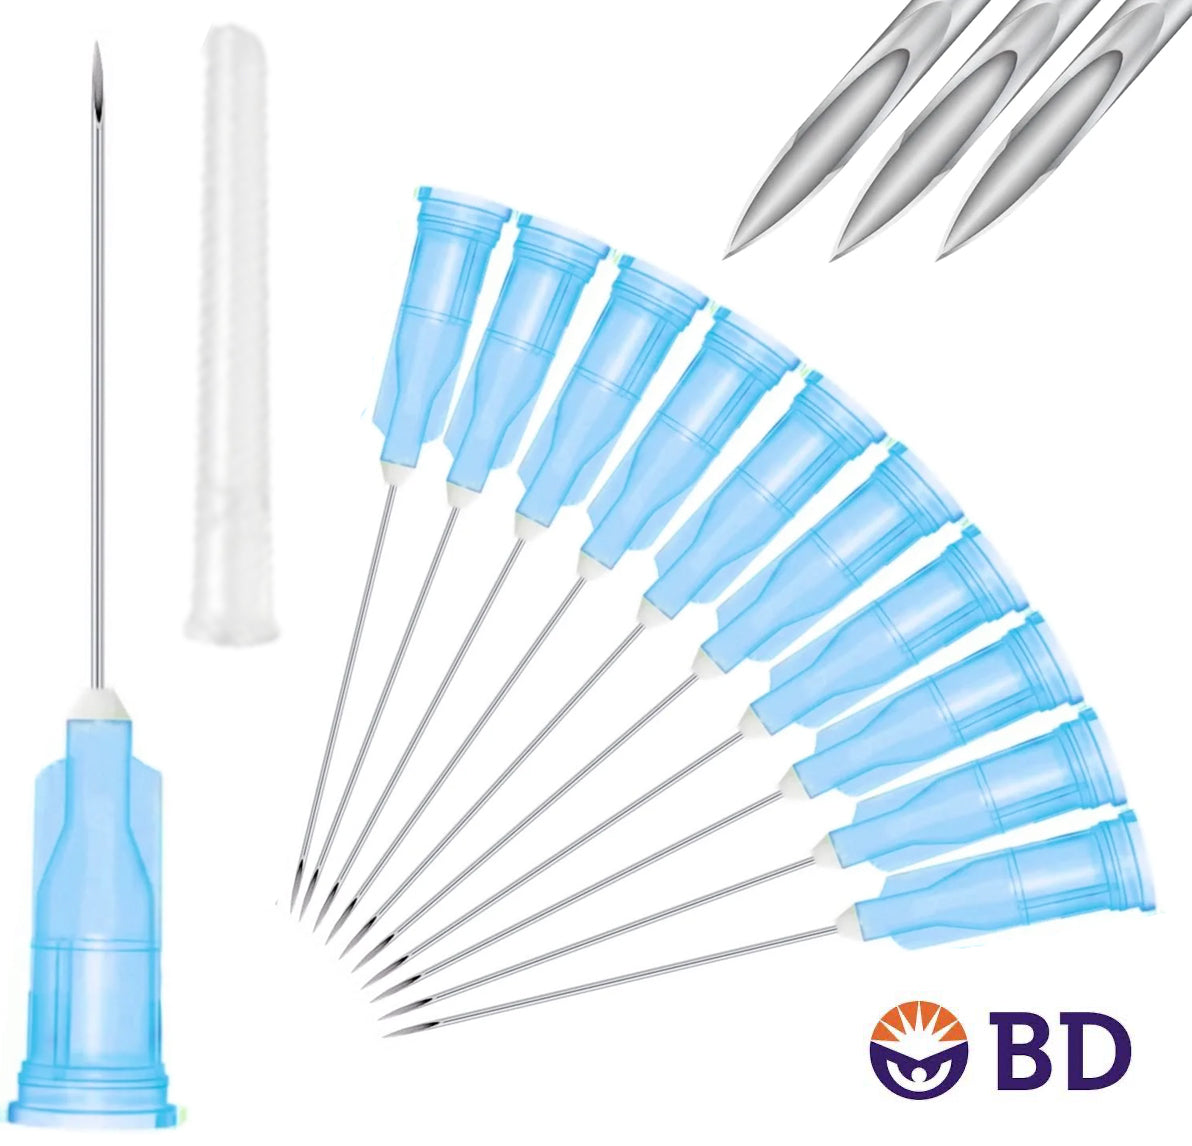 Disposable Hypodermic Medical Needles – Order Now!